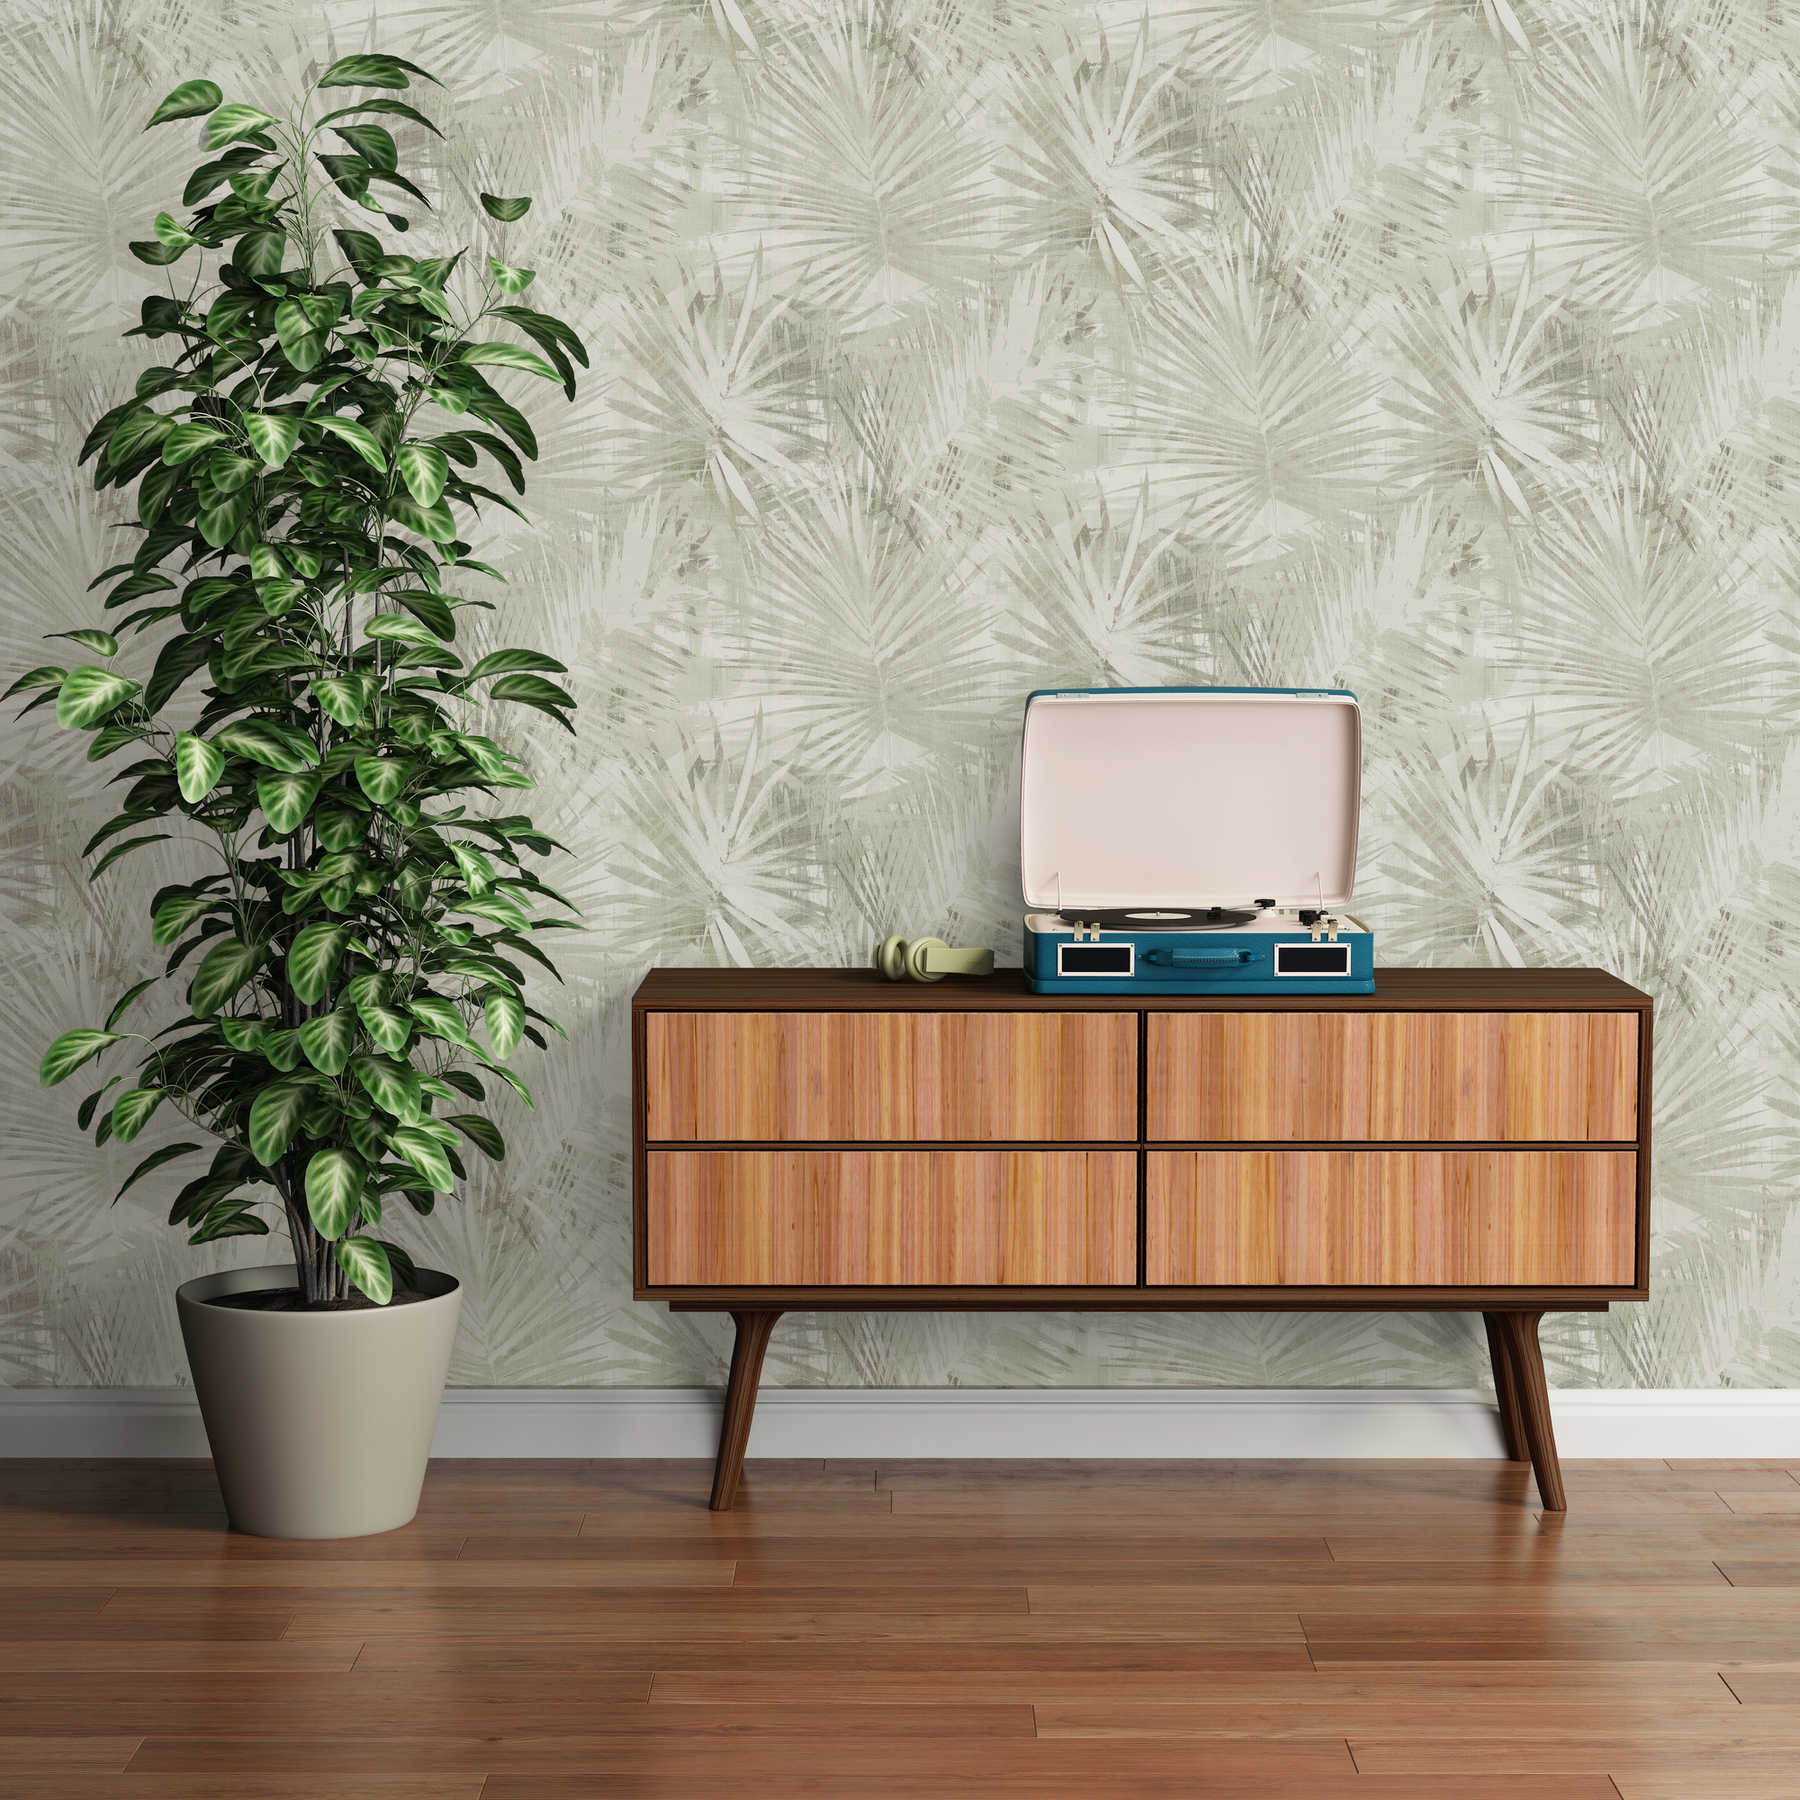             Hygge wallpaper with leaves motif in watercolour style - cream, green
        